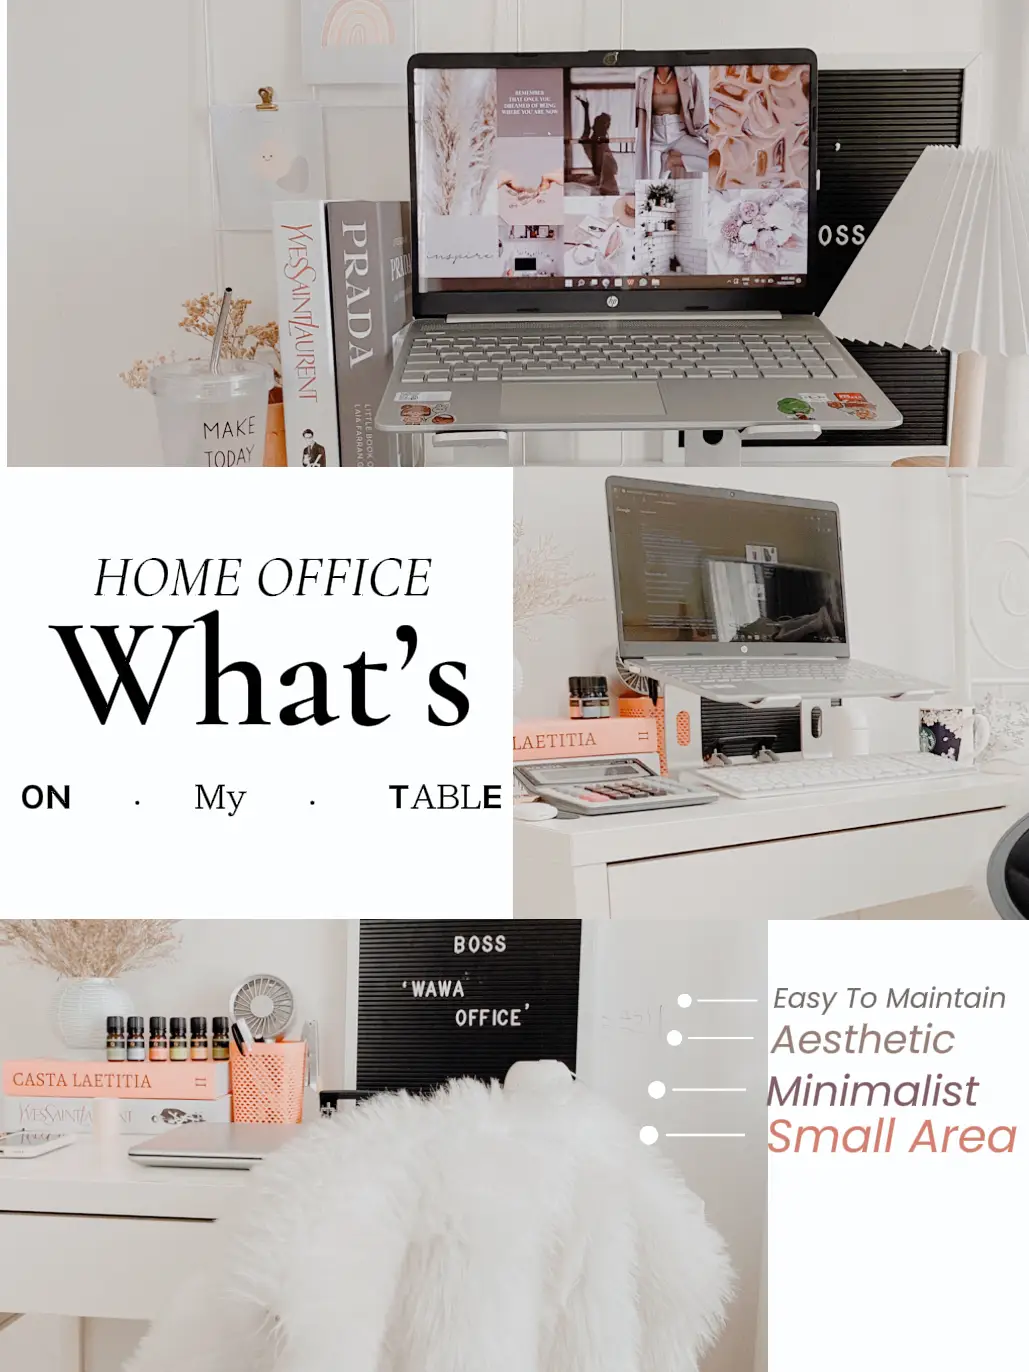 SIMPLE HOME OFFICE IDEAS FOR WORK FROM HOME MOM | Bộ sưu tập do ...